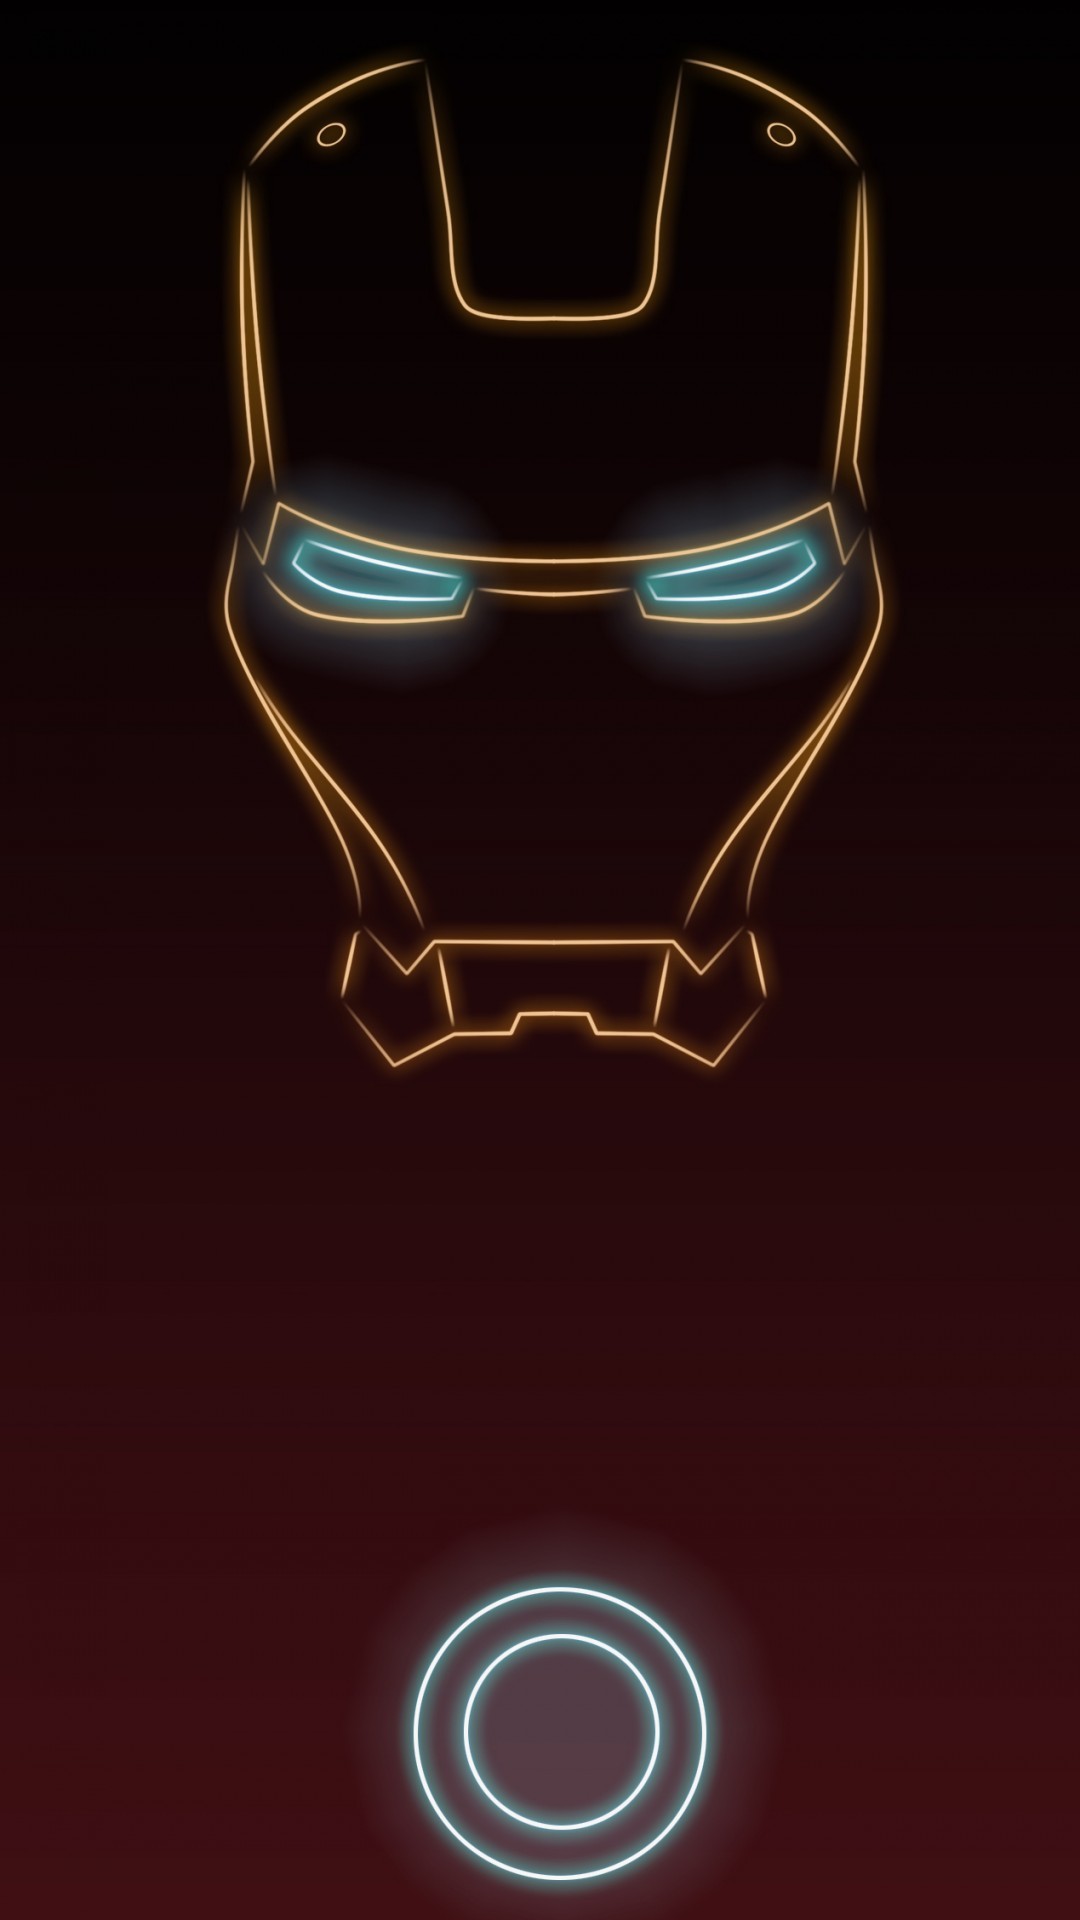 1080x1920 Cool Manly Wallpapers | HD Wallpapers | Pinterest | Iron man wallpaper,  Wallpaper and Wallpaper backgrounds